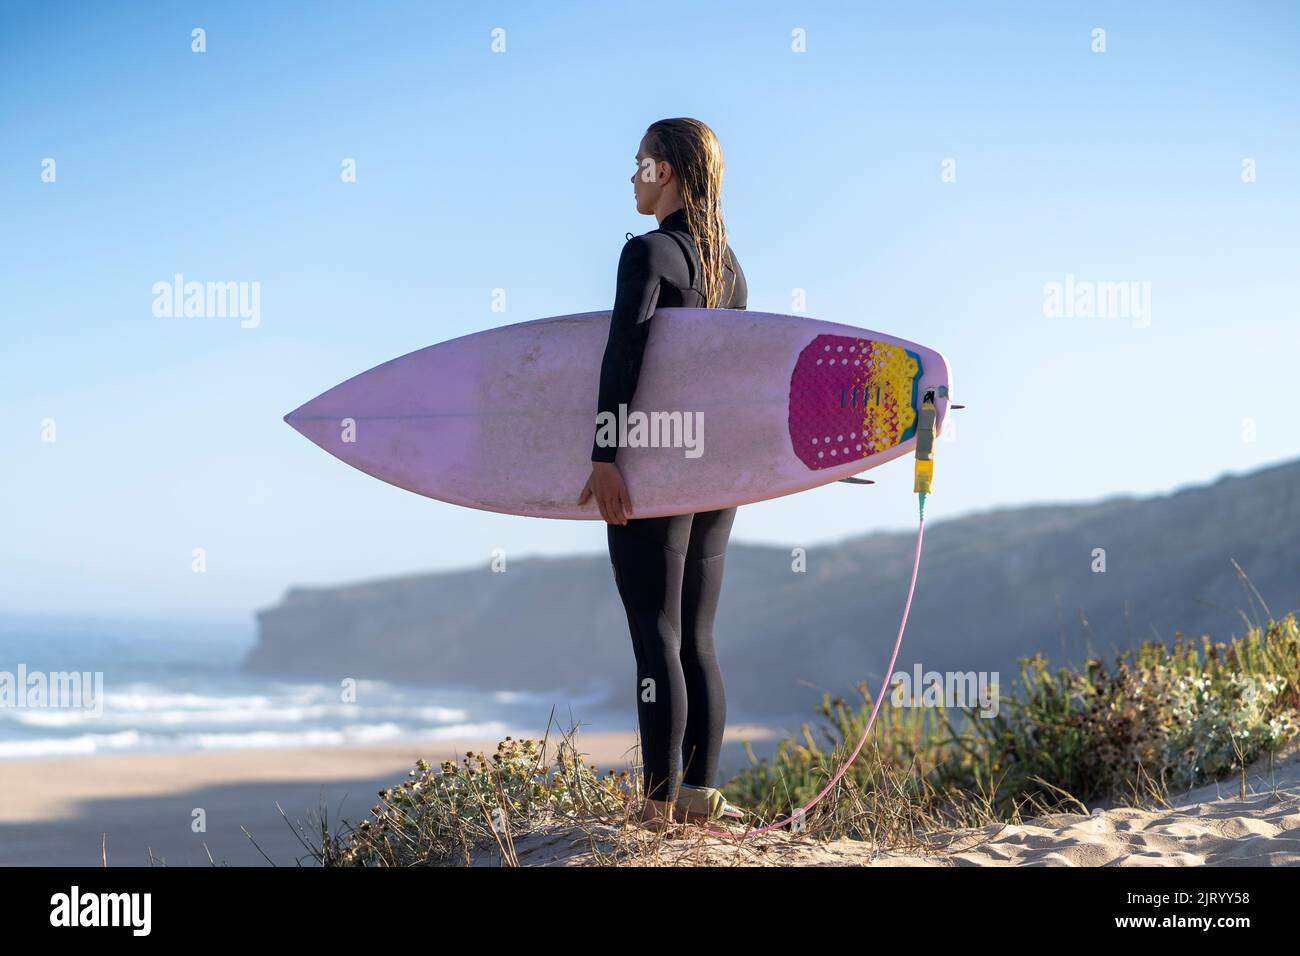 Surfer girl at the beach with her surfboard looking at the waves in the morning. Stock Photo